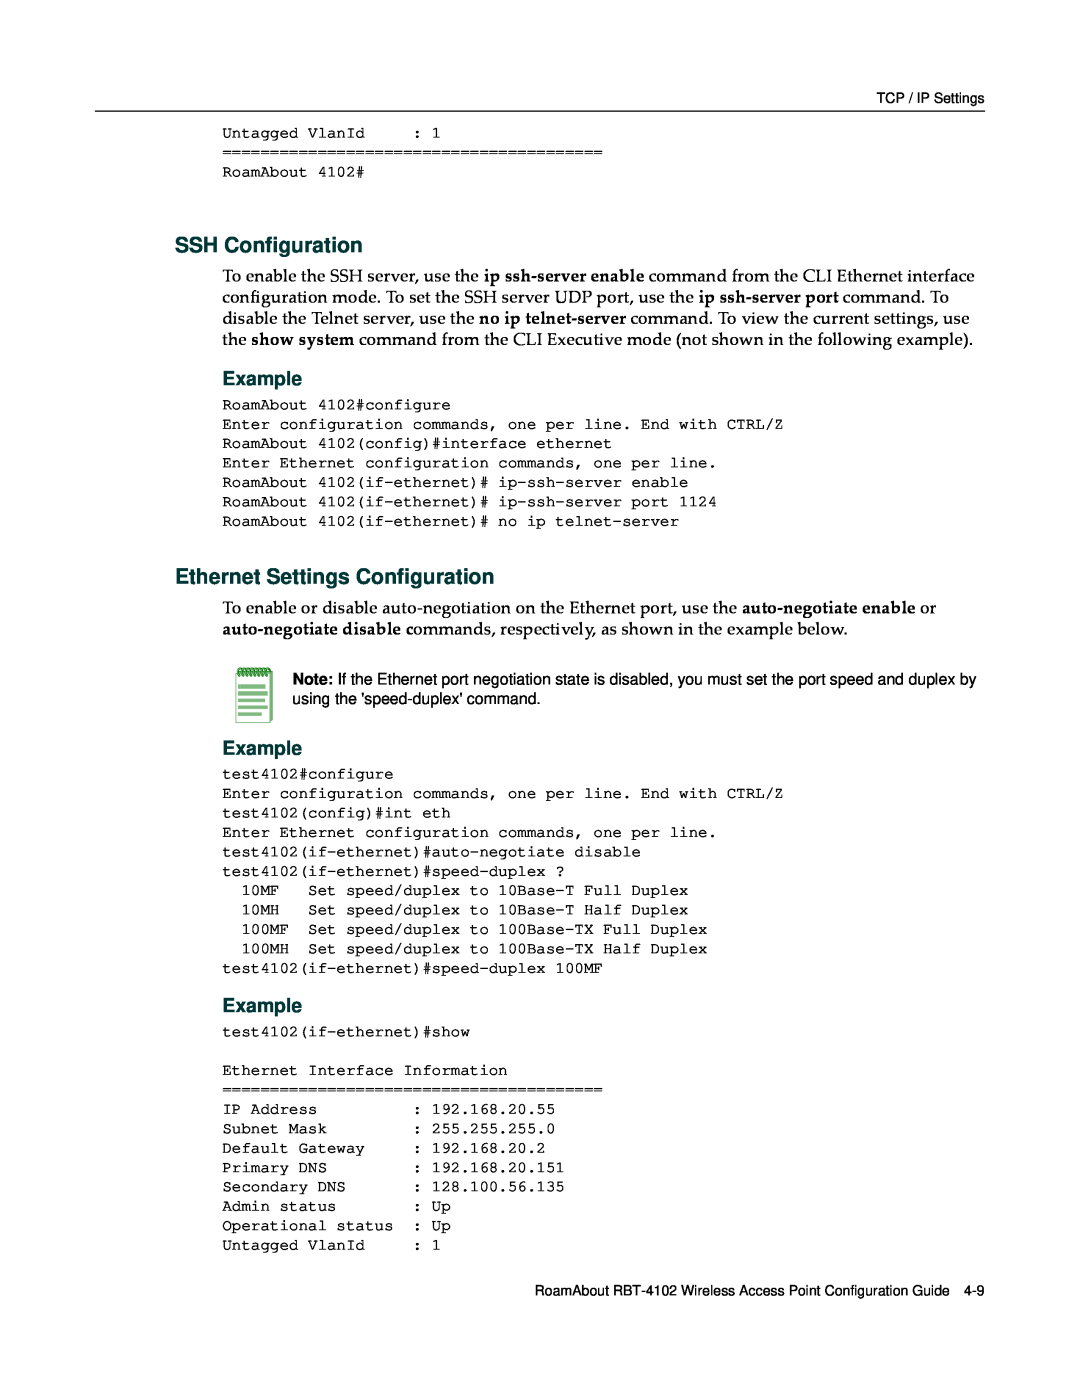 Enterasys Networks RBT-4102 manual SSH Configuration, Ethernet Settings Configuration, Example 